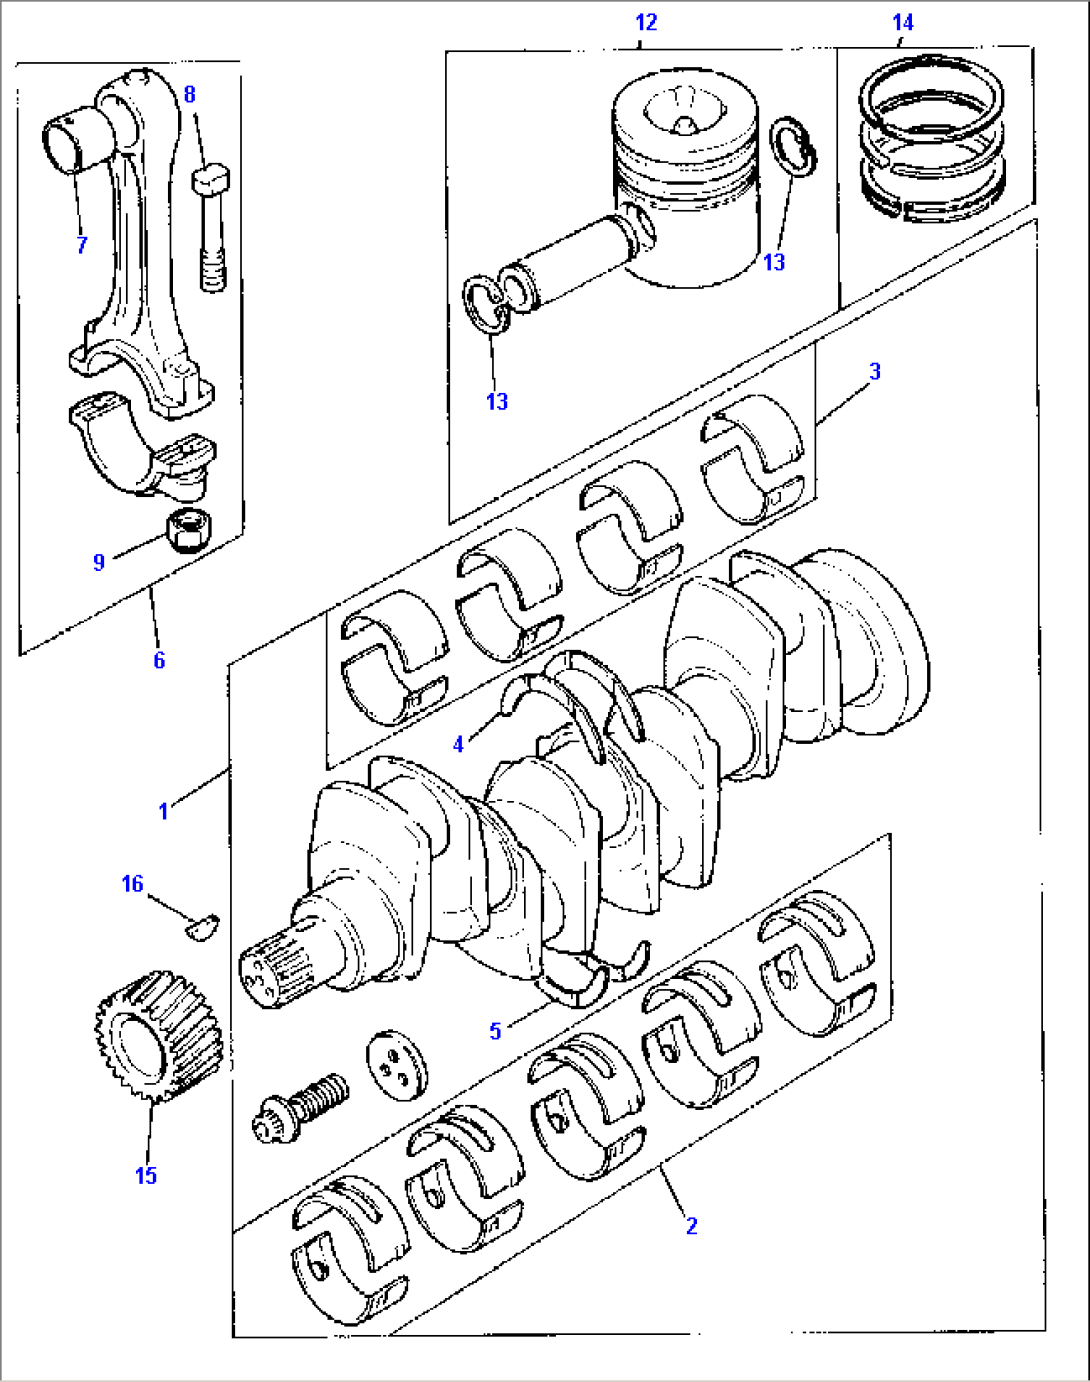 CRANKSHAFT - PISTONS AND CONNECTING RODS